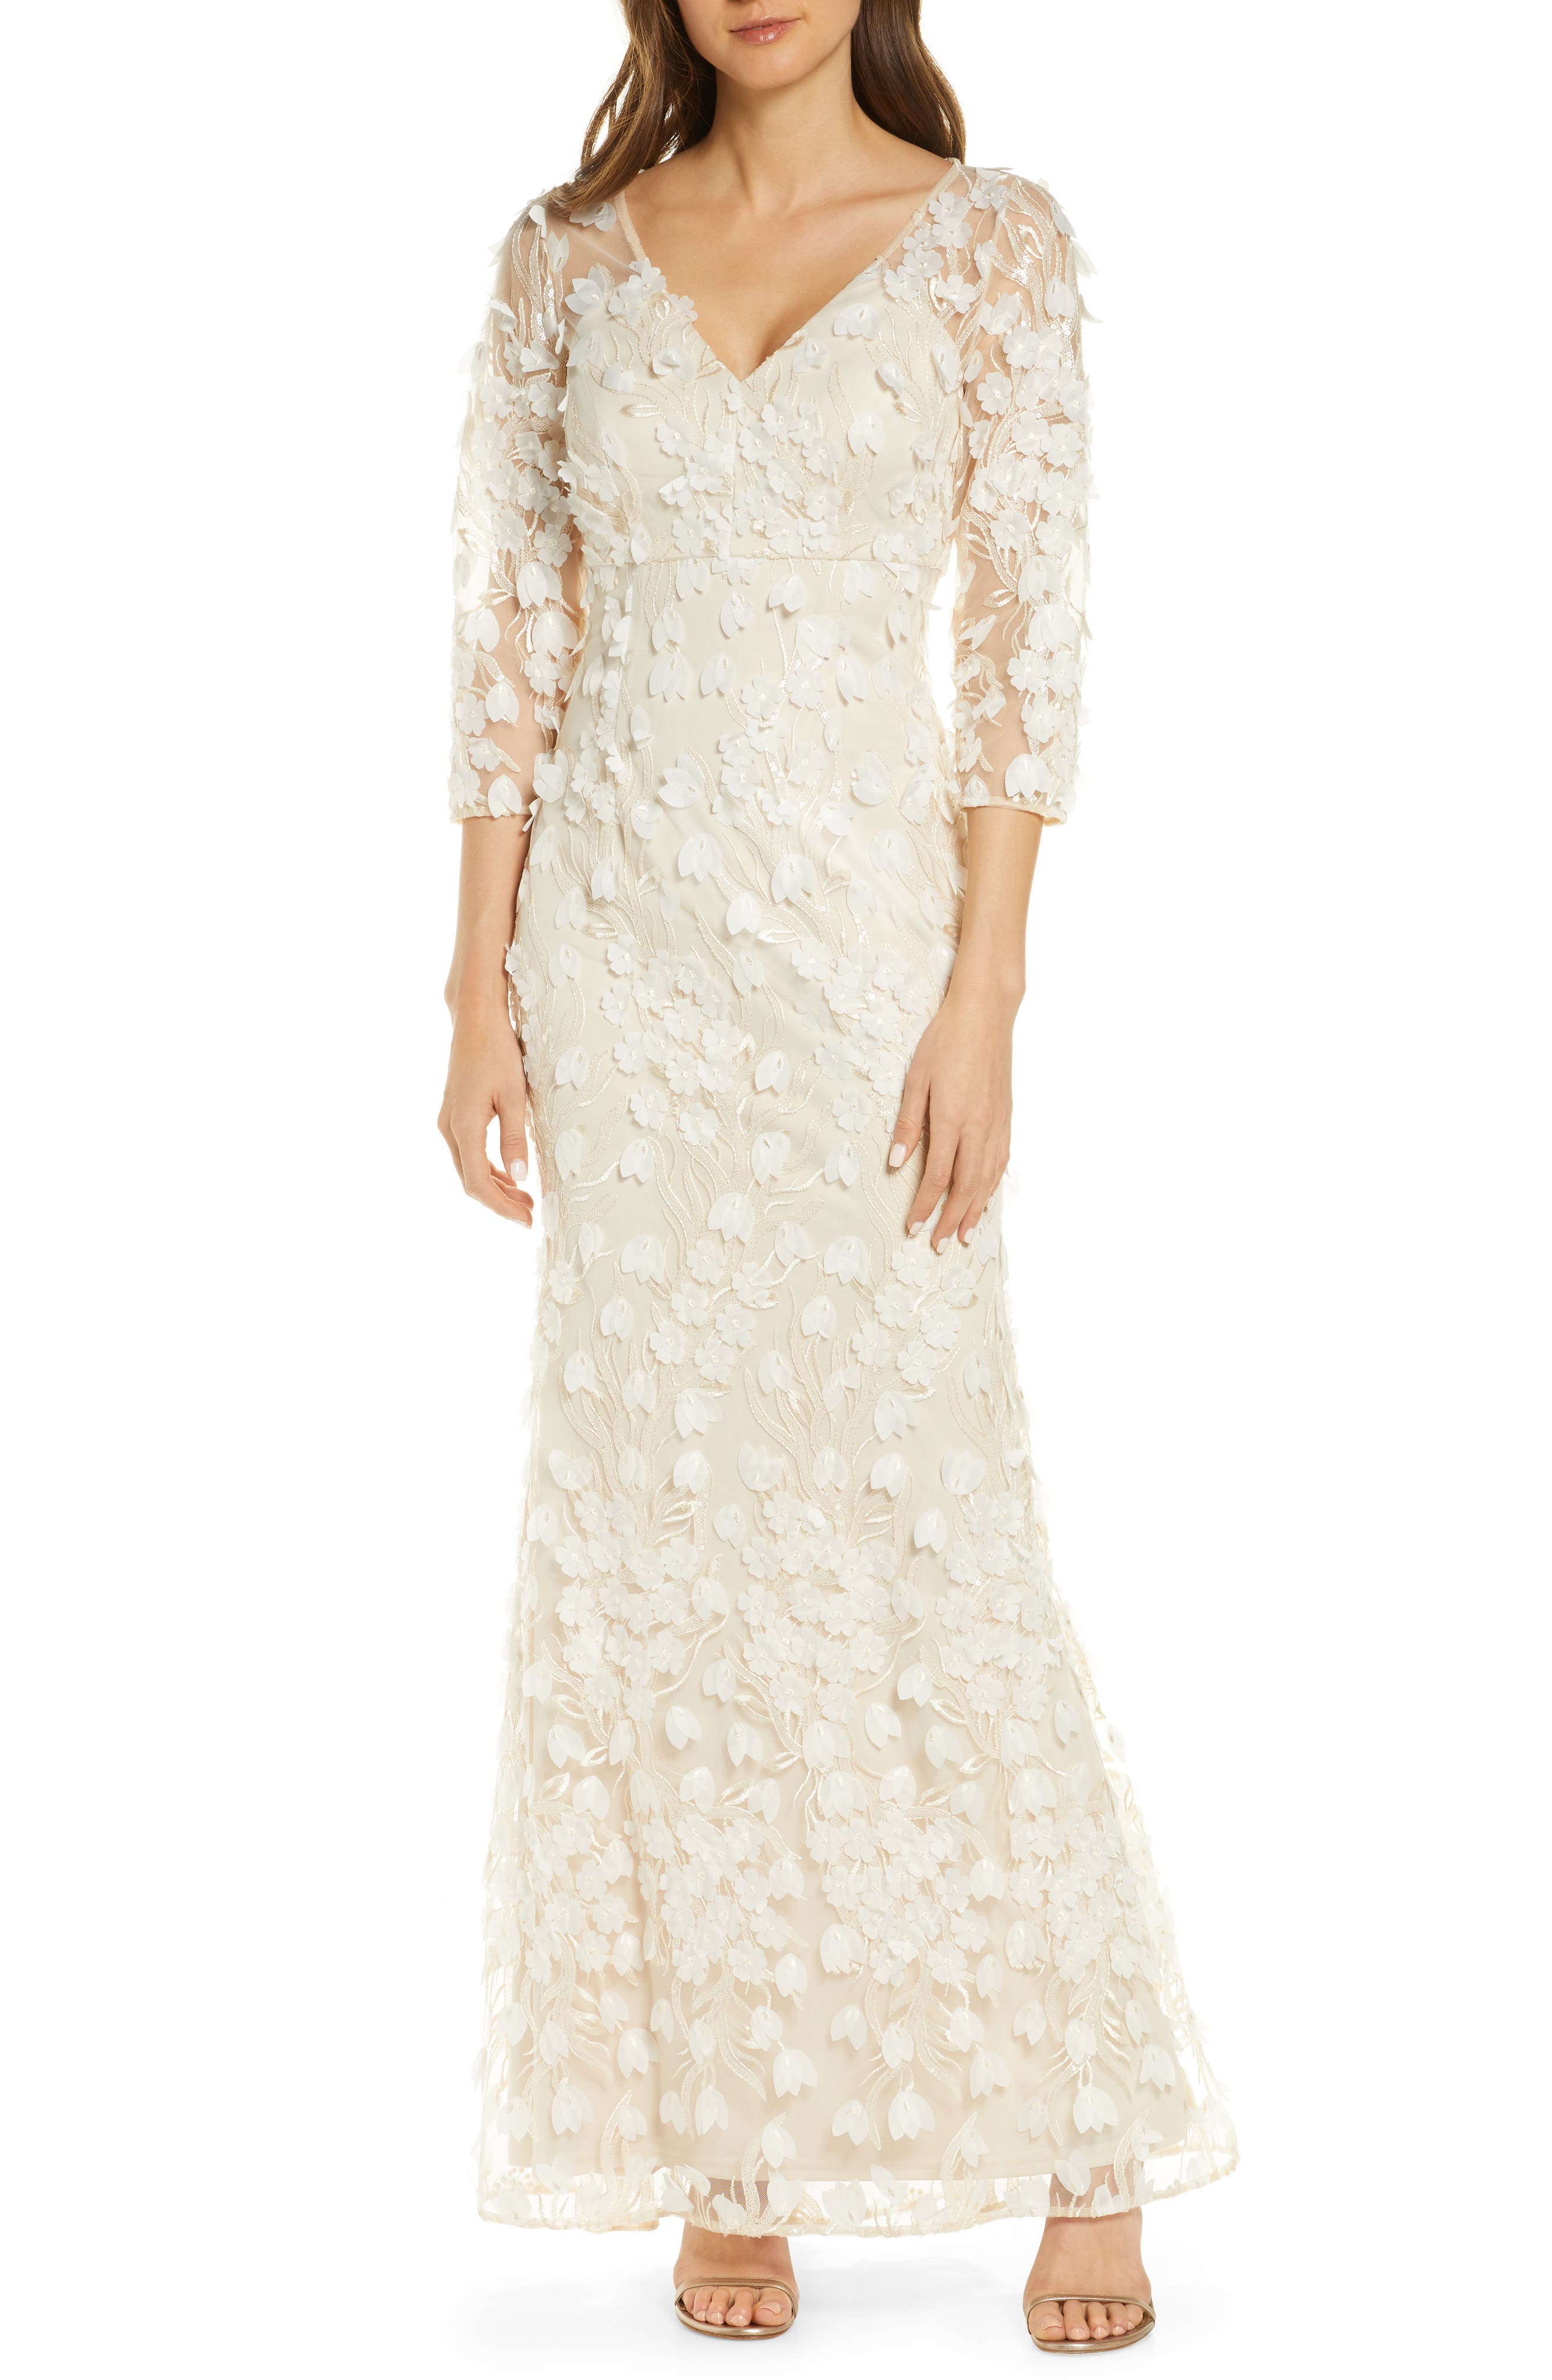 carmen marc valvo infusion 3d floral mermaid gown